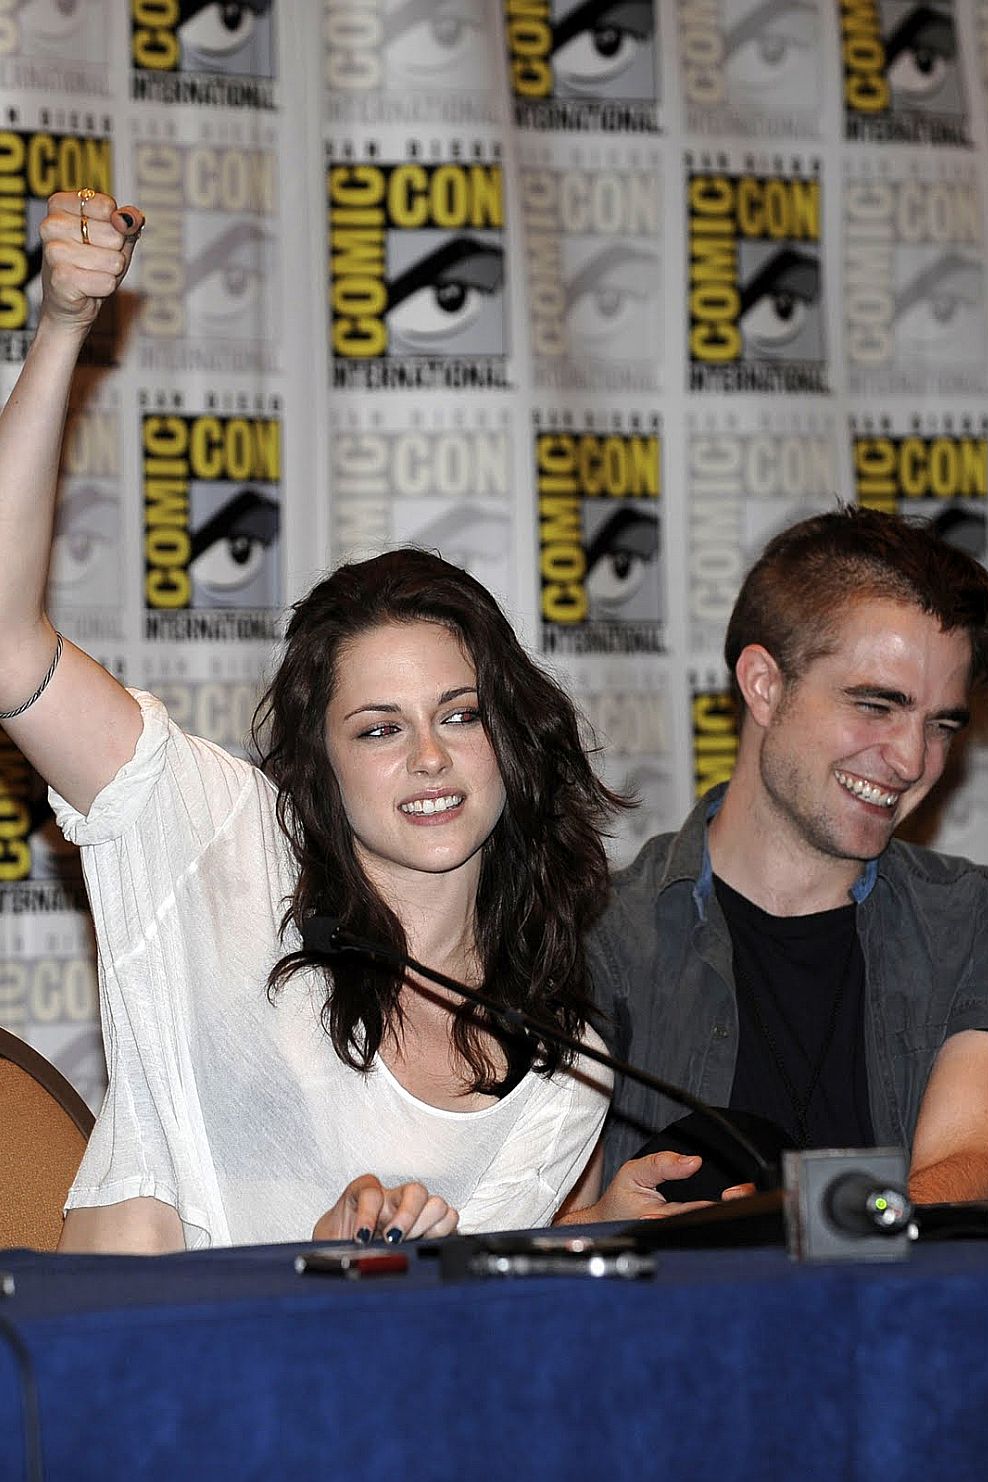 Kristen Stewart, Robert Pattinson poses to promote Breaking Dawn from the Twilight Saga at  the 2011 Comic-Con International Day 1 at the San Diego Convention Center on July 21, 2011